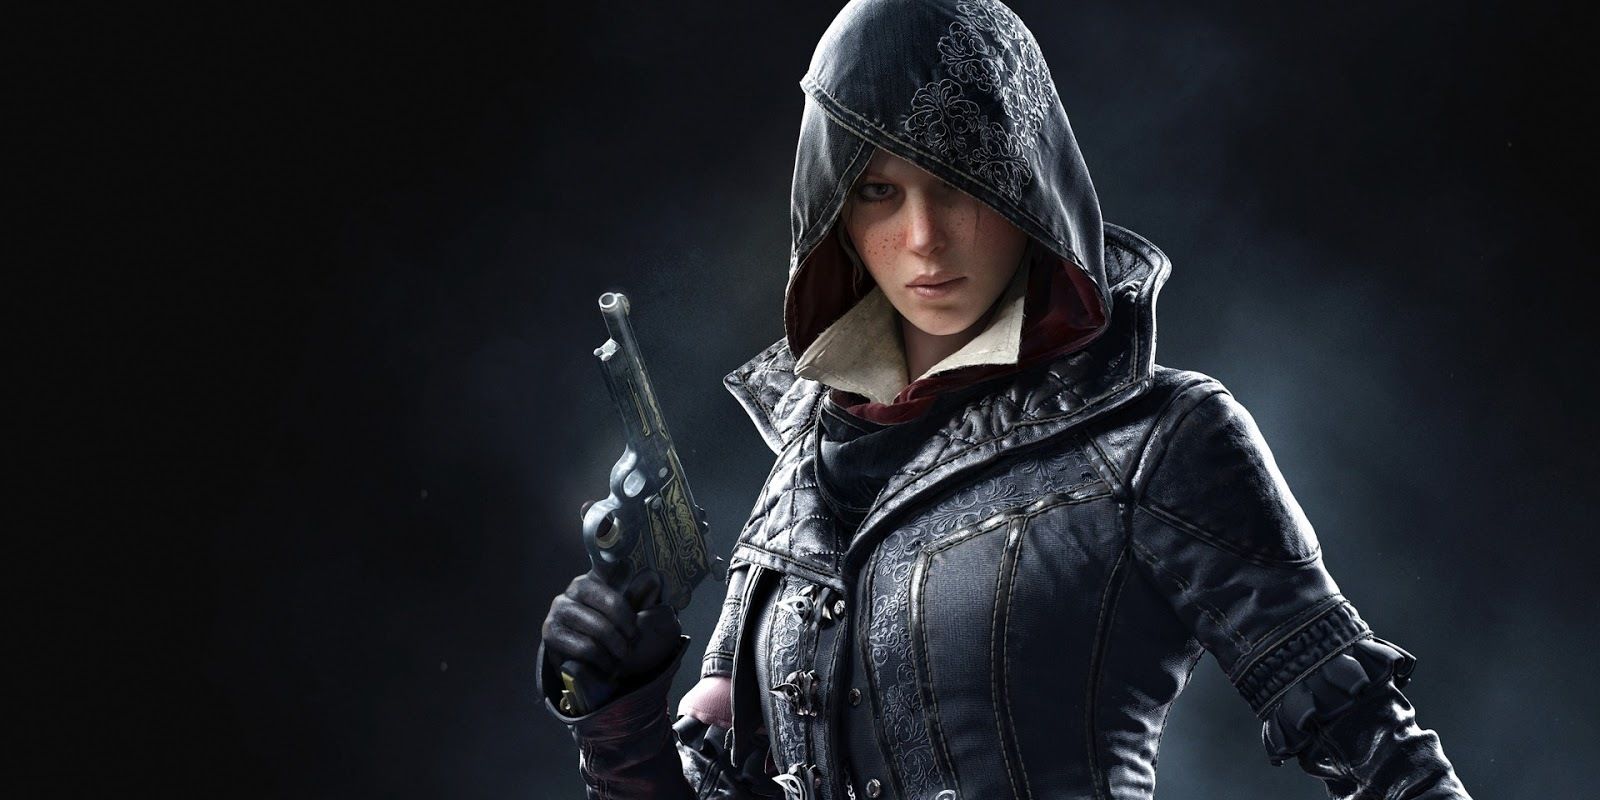 Evie Frye holds a gun in Assassin's Creed Syndicate